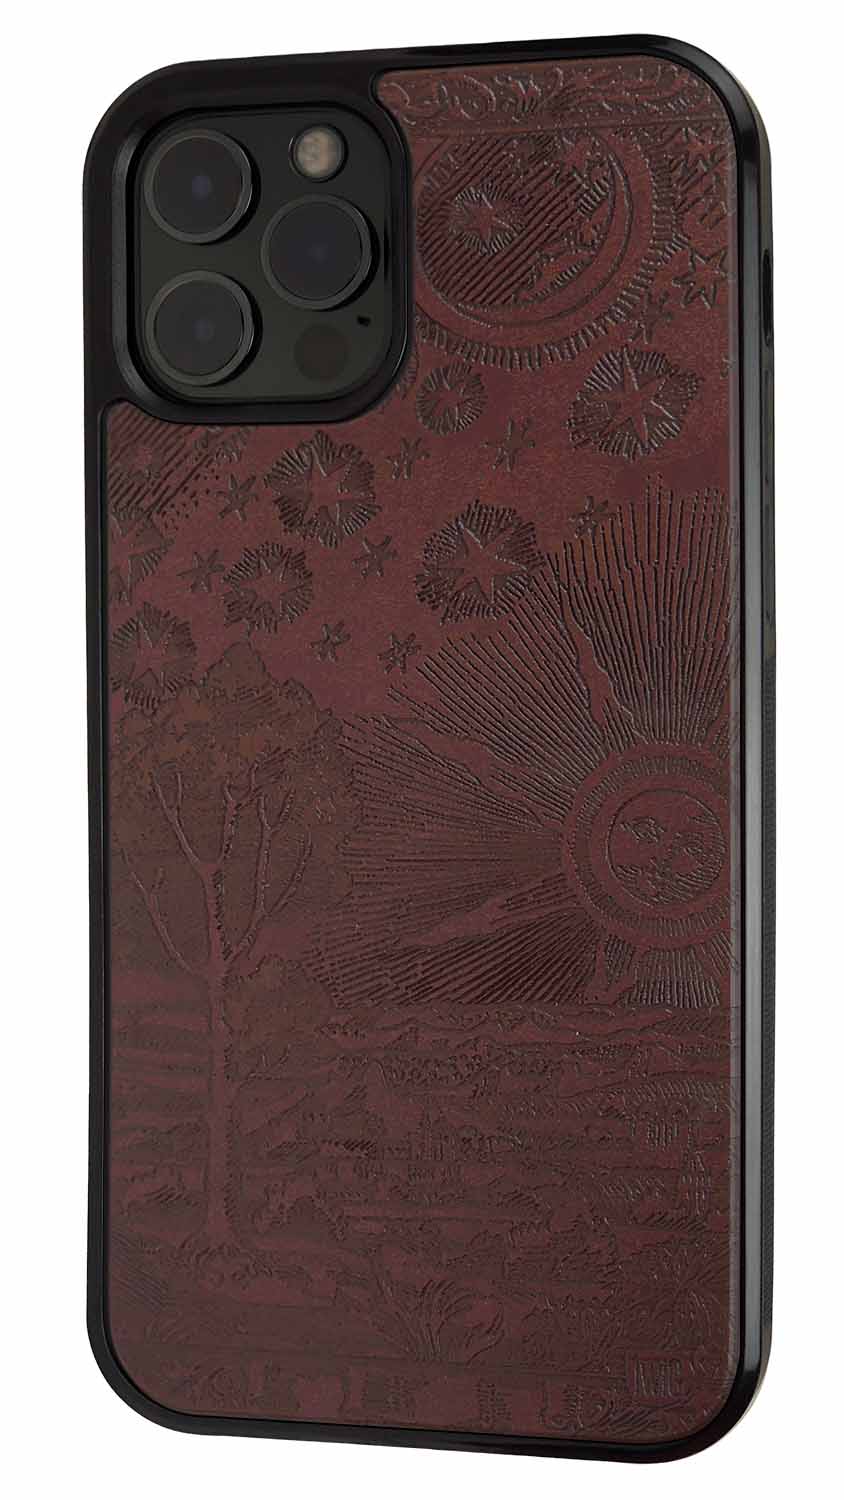 Nightfall - Color Paper iPhone Case, iPhone Case - Twig Case Co.